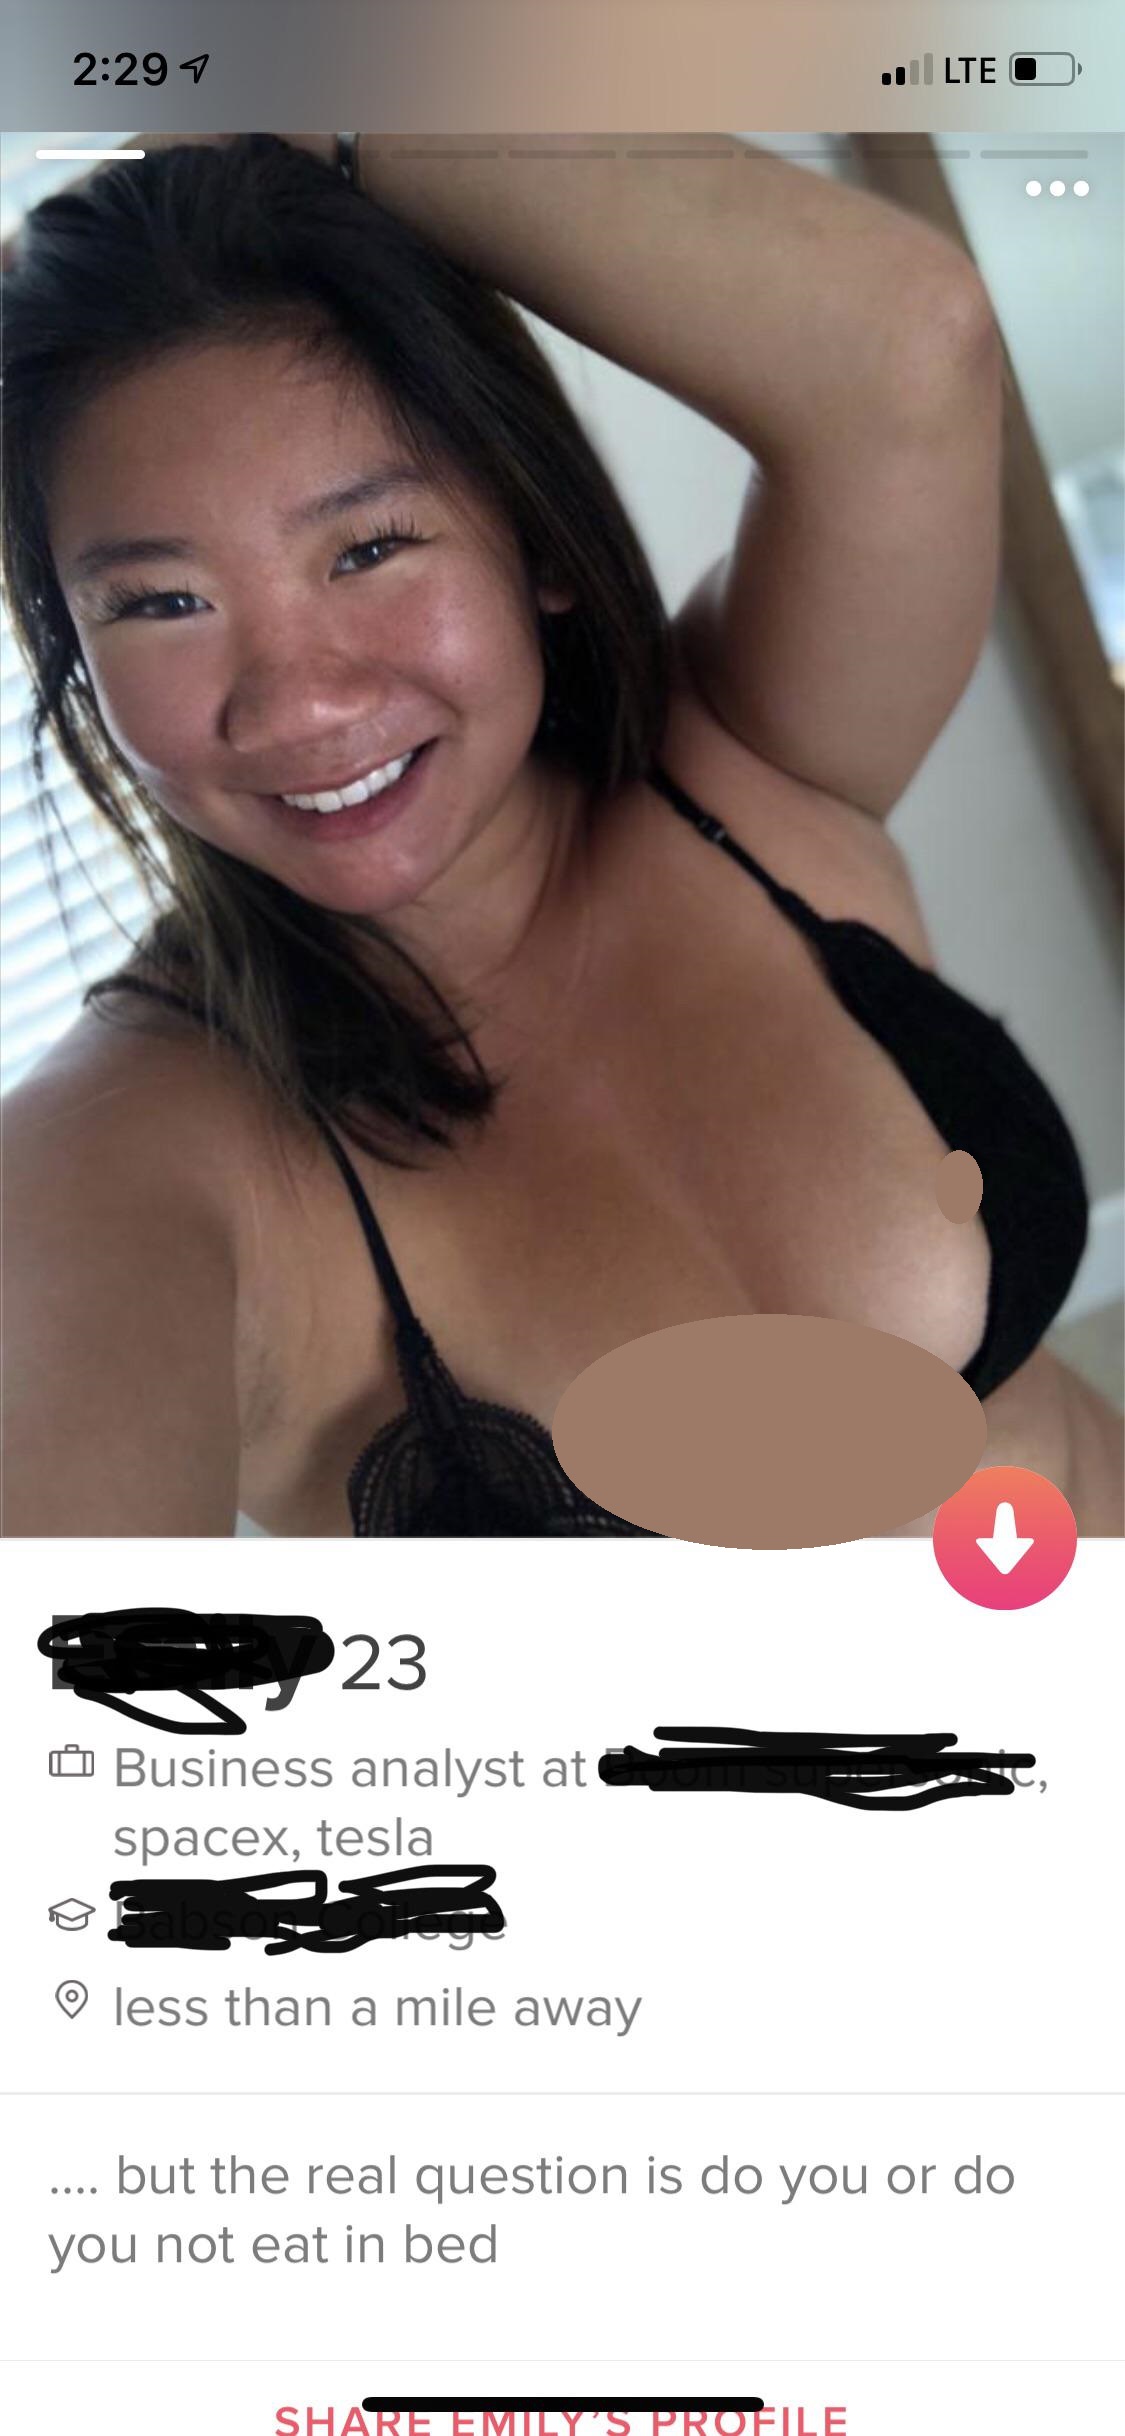 tinder - beauty - 7 ..1 Lte O Business analyst at spacex, tesla o less than a mile away .... but the real question is do you or do you not eat in bed Emily'S Profile